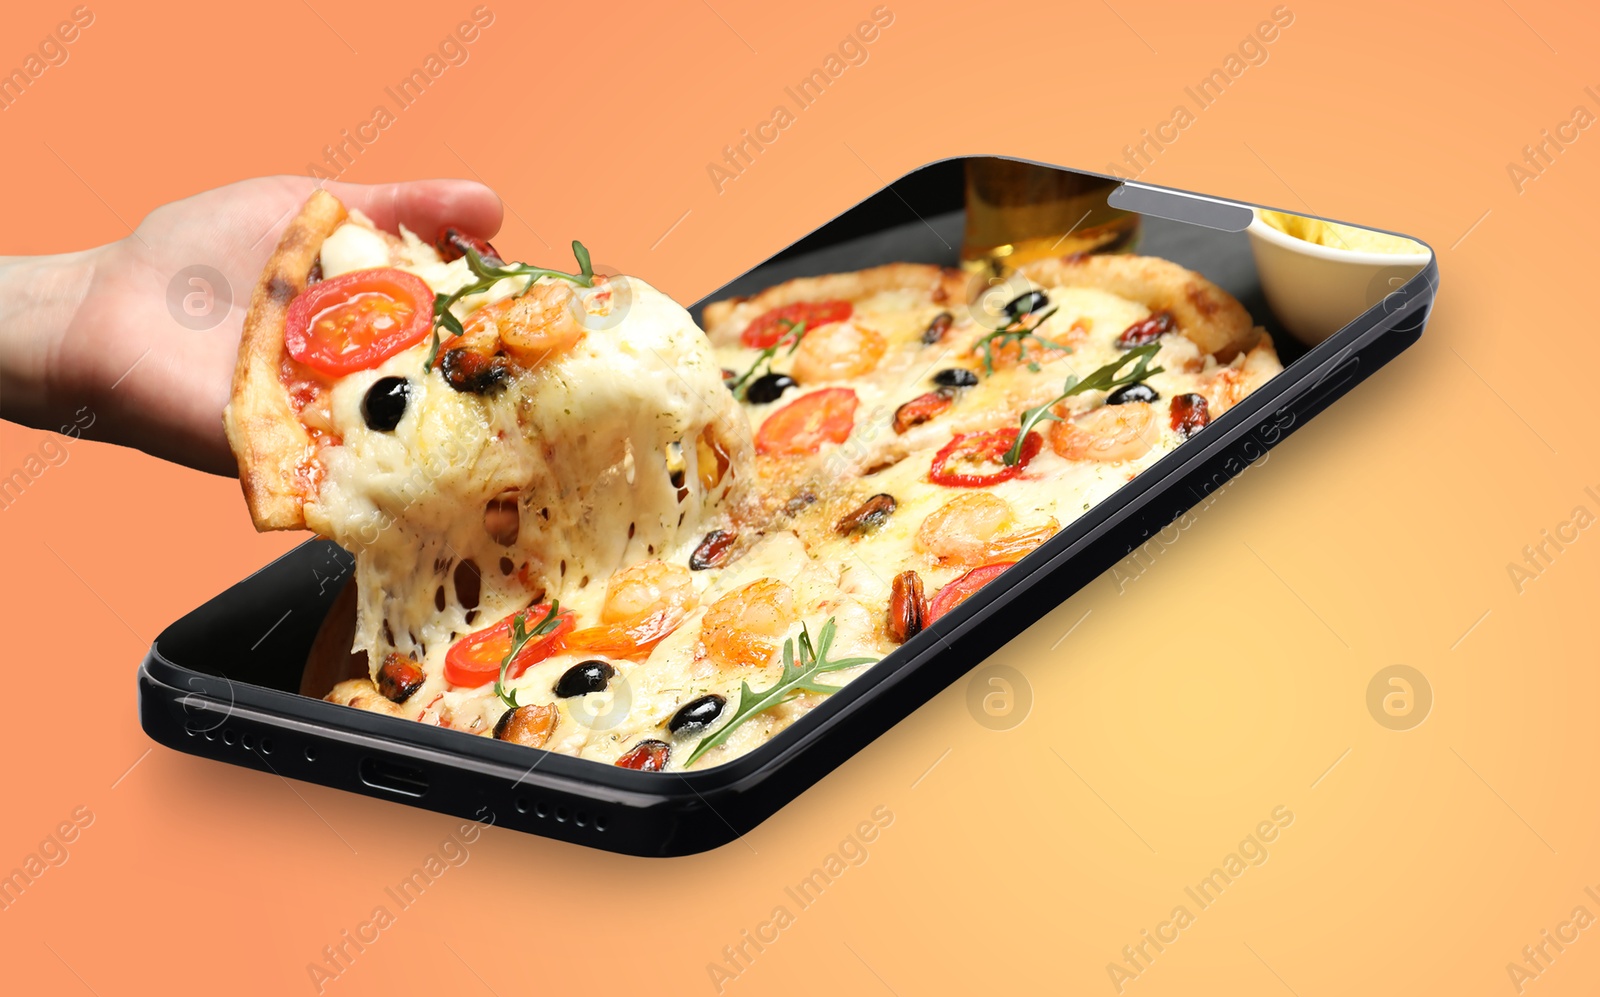 Image of Online food ordering. Woman taking slice of pizza from smartphone screen against orange gradient background, closeup